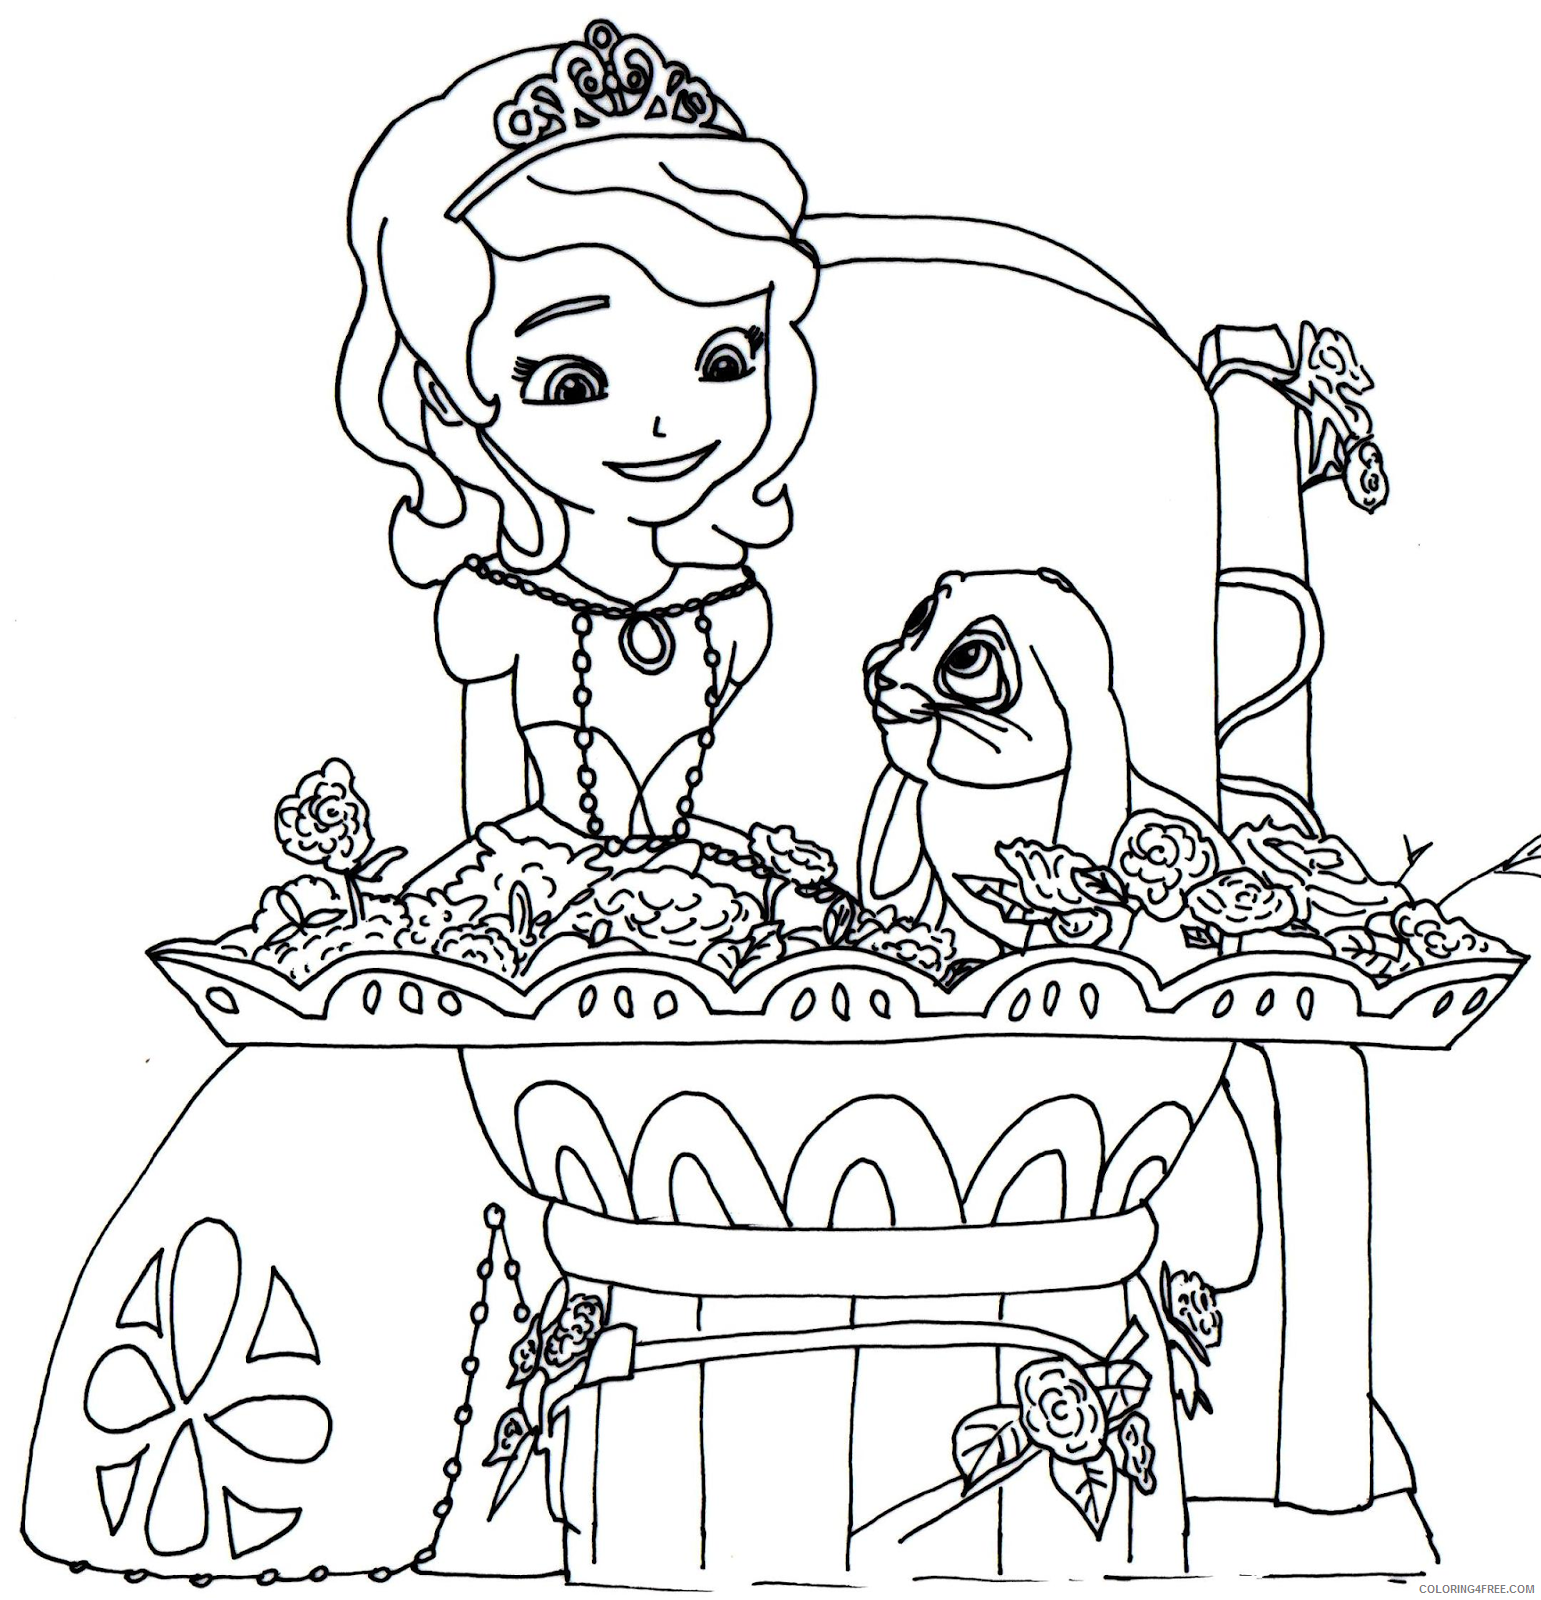 Sofia the First Coloring Pages Cartoons Sofia the First Printable 2020 5860 Coloring4free